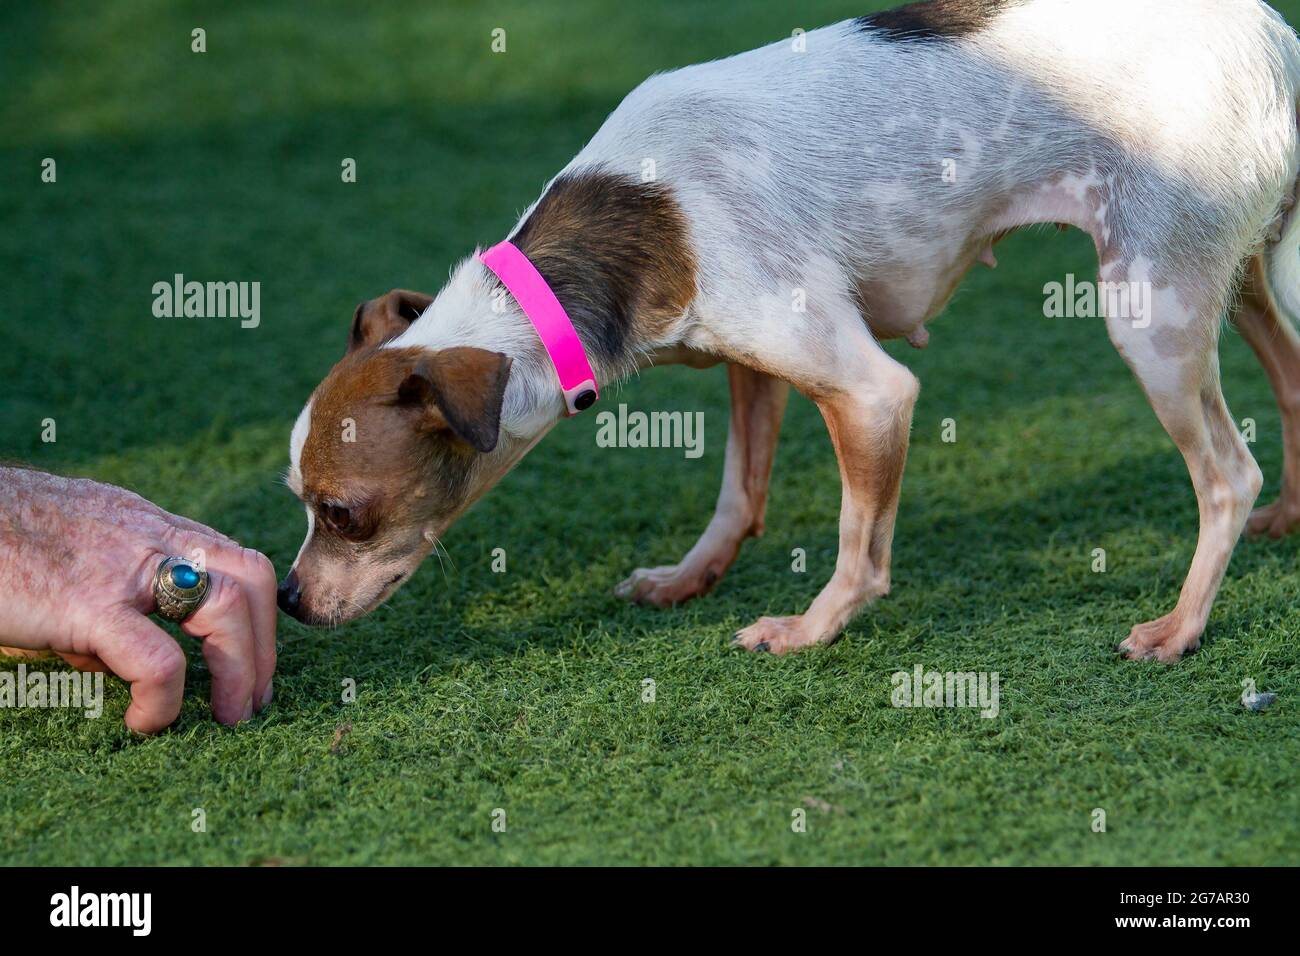 Older mixed Chihuahua Terrier dog in the arms of a trainer and caretaker at a dog resue facility Stock Photo